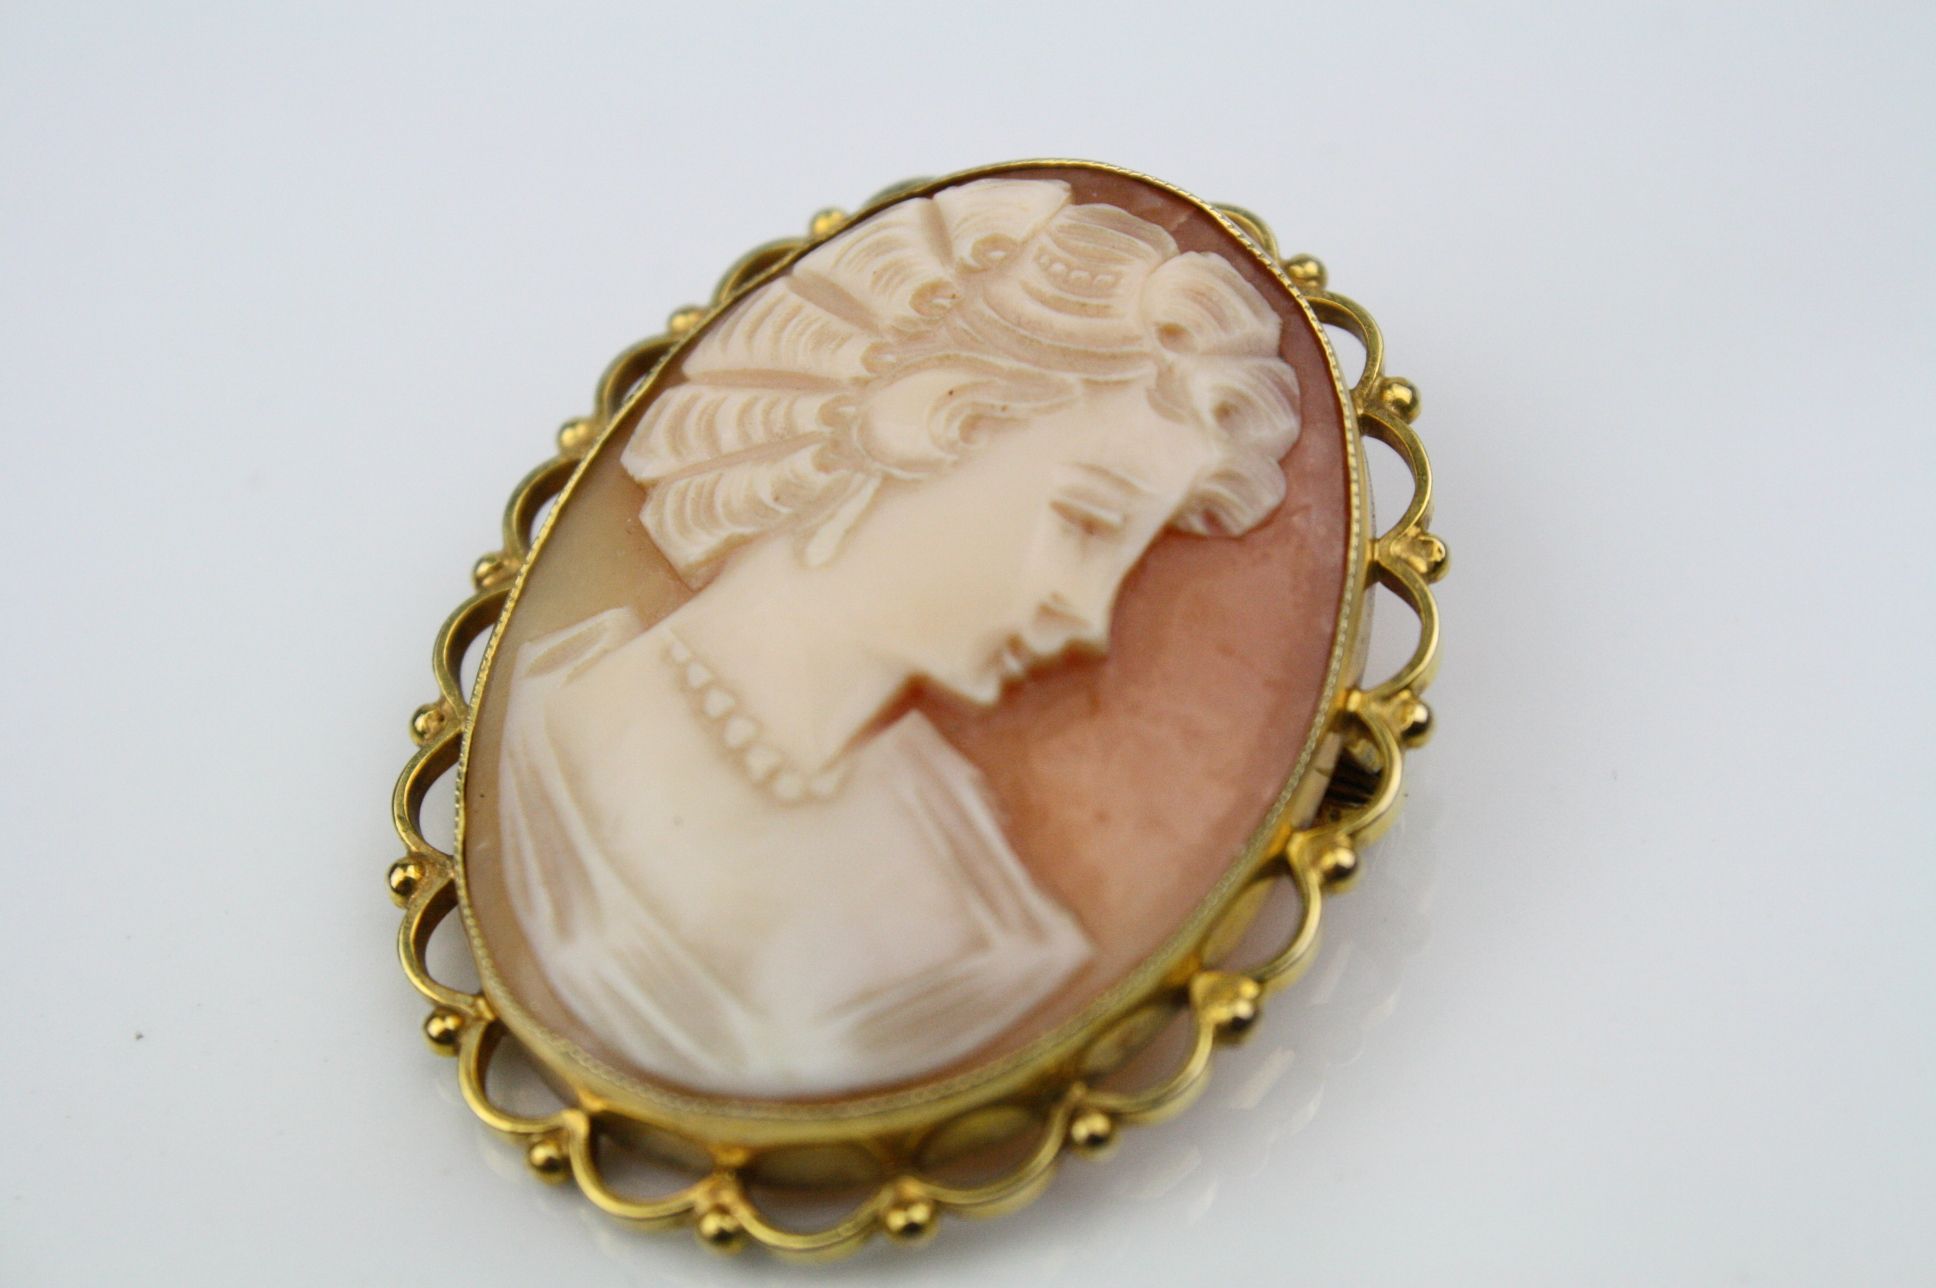 Shell cameo 9ct yellow gold brooch, the cameo depicting female profile, collet setting, scroll and - Image 4 of 4